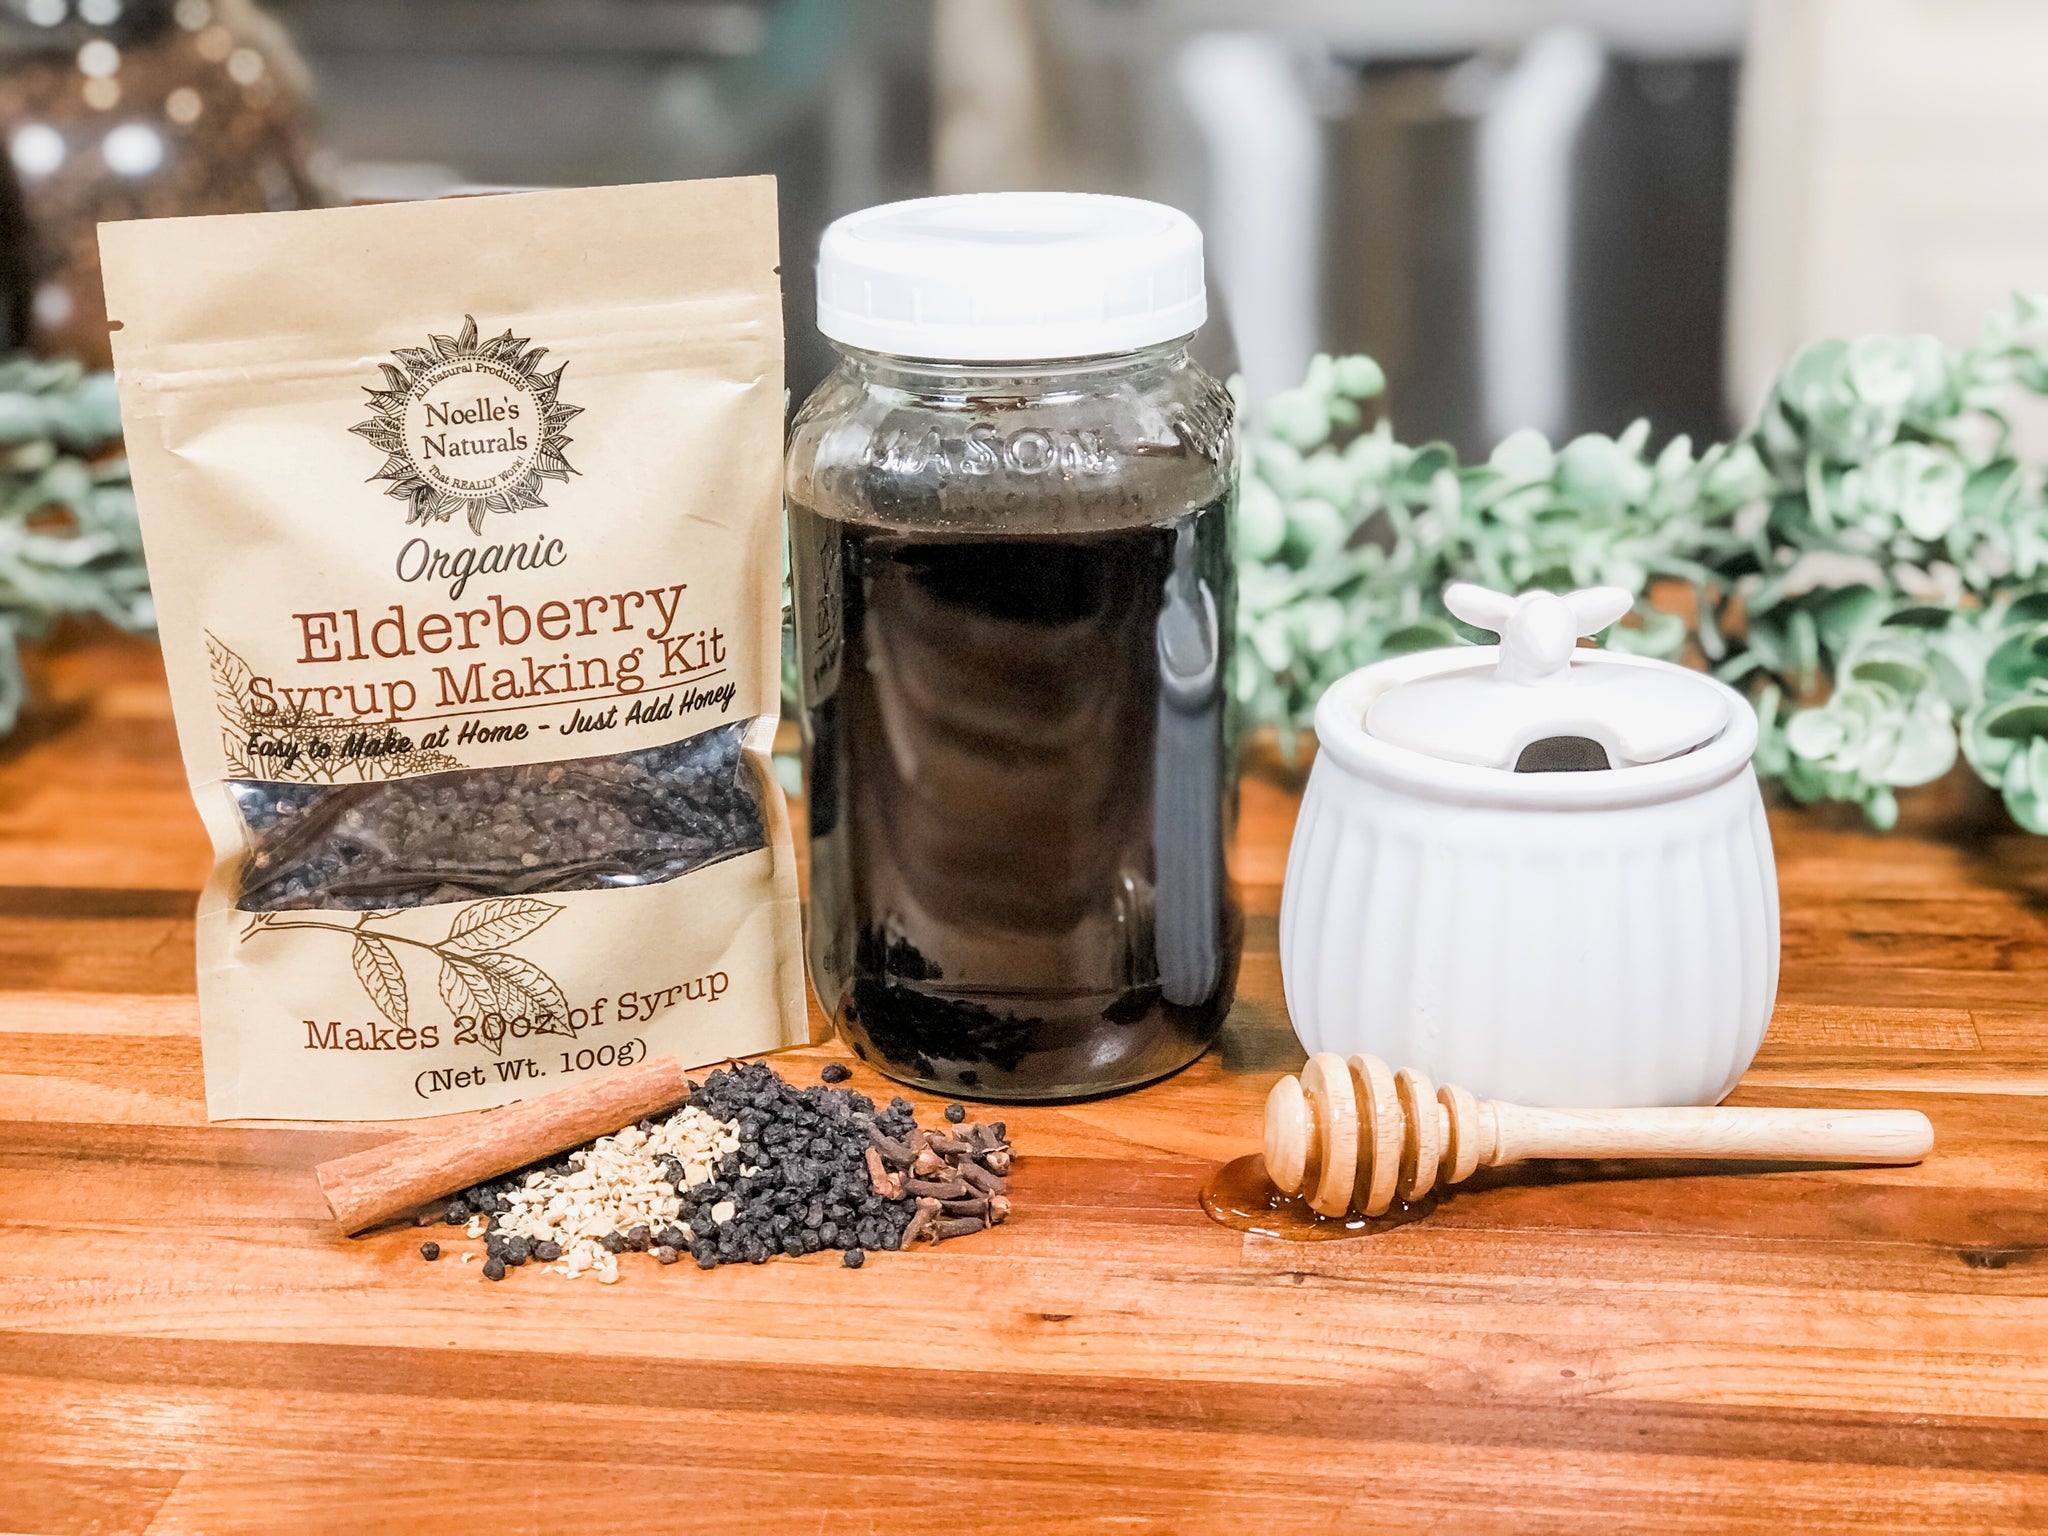 How To Make Elderberry Syrup Easily at Home!